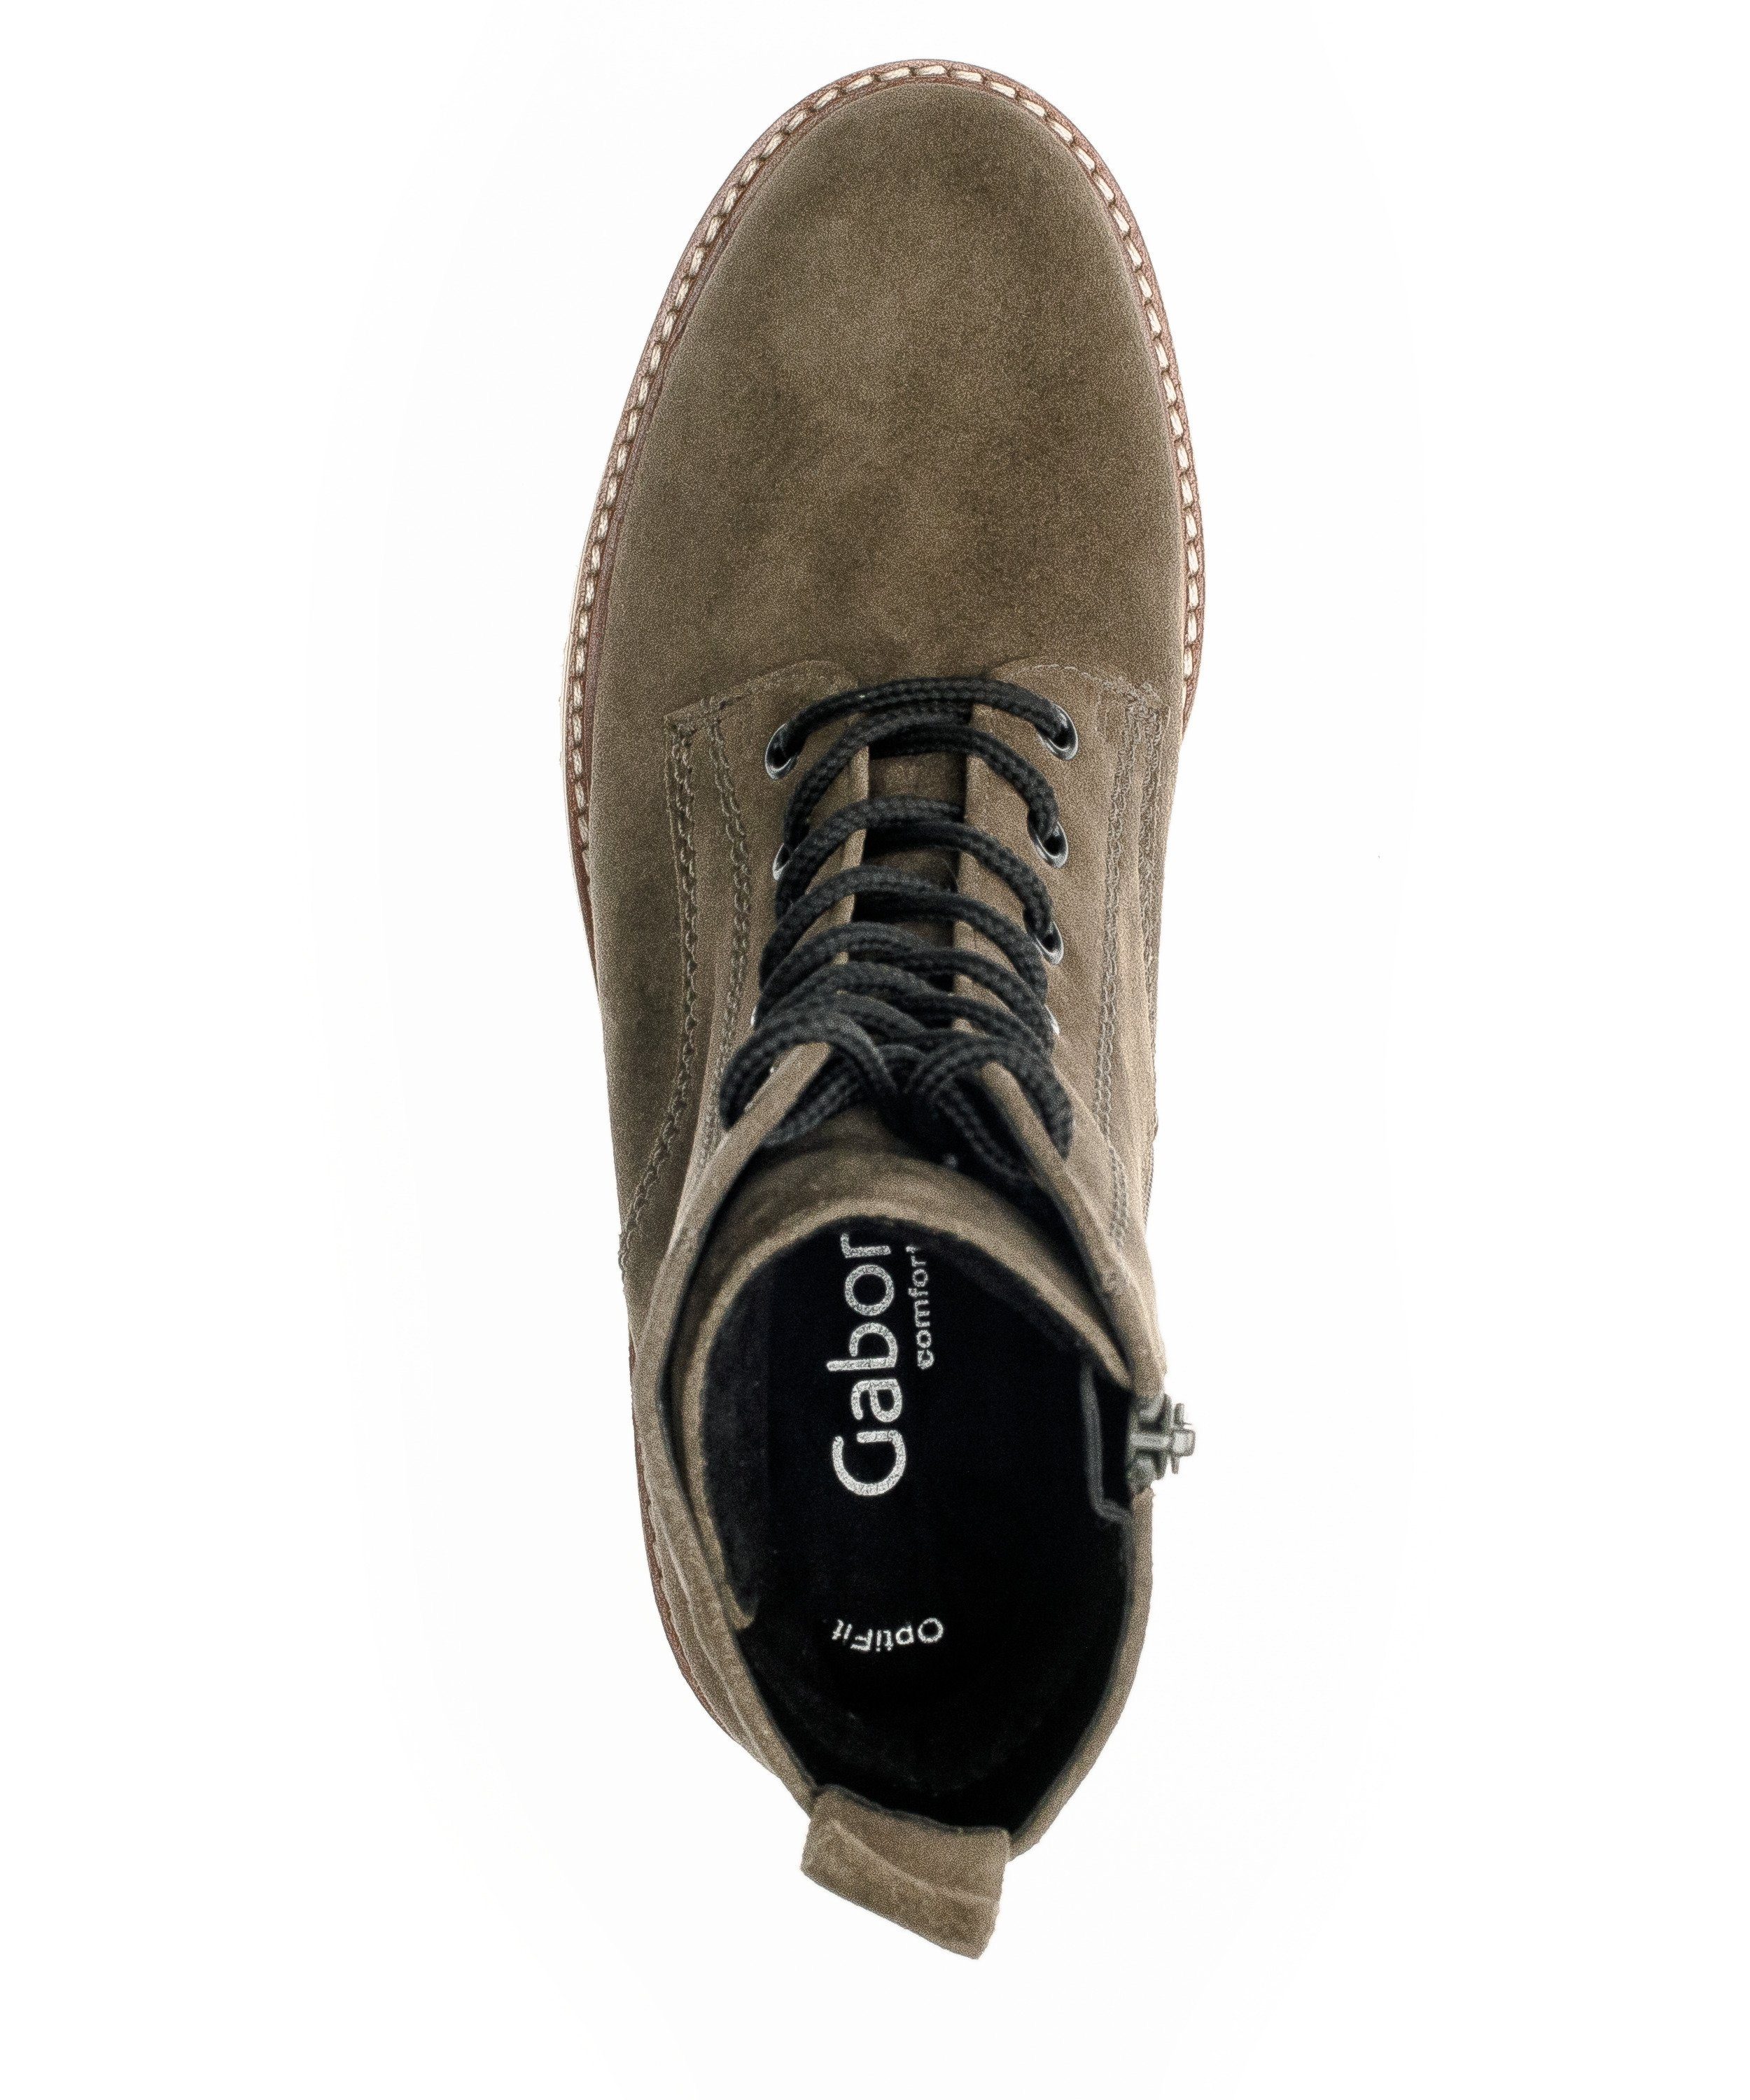 Gabor (Micro) Chelseaboots oliv Comfort